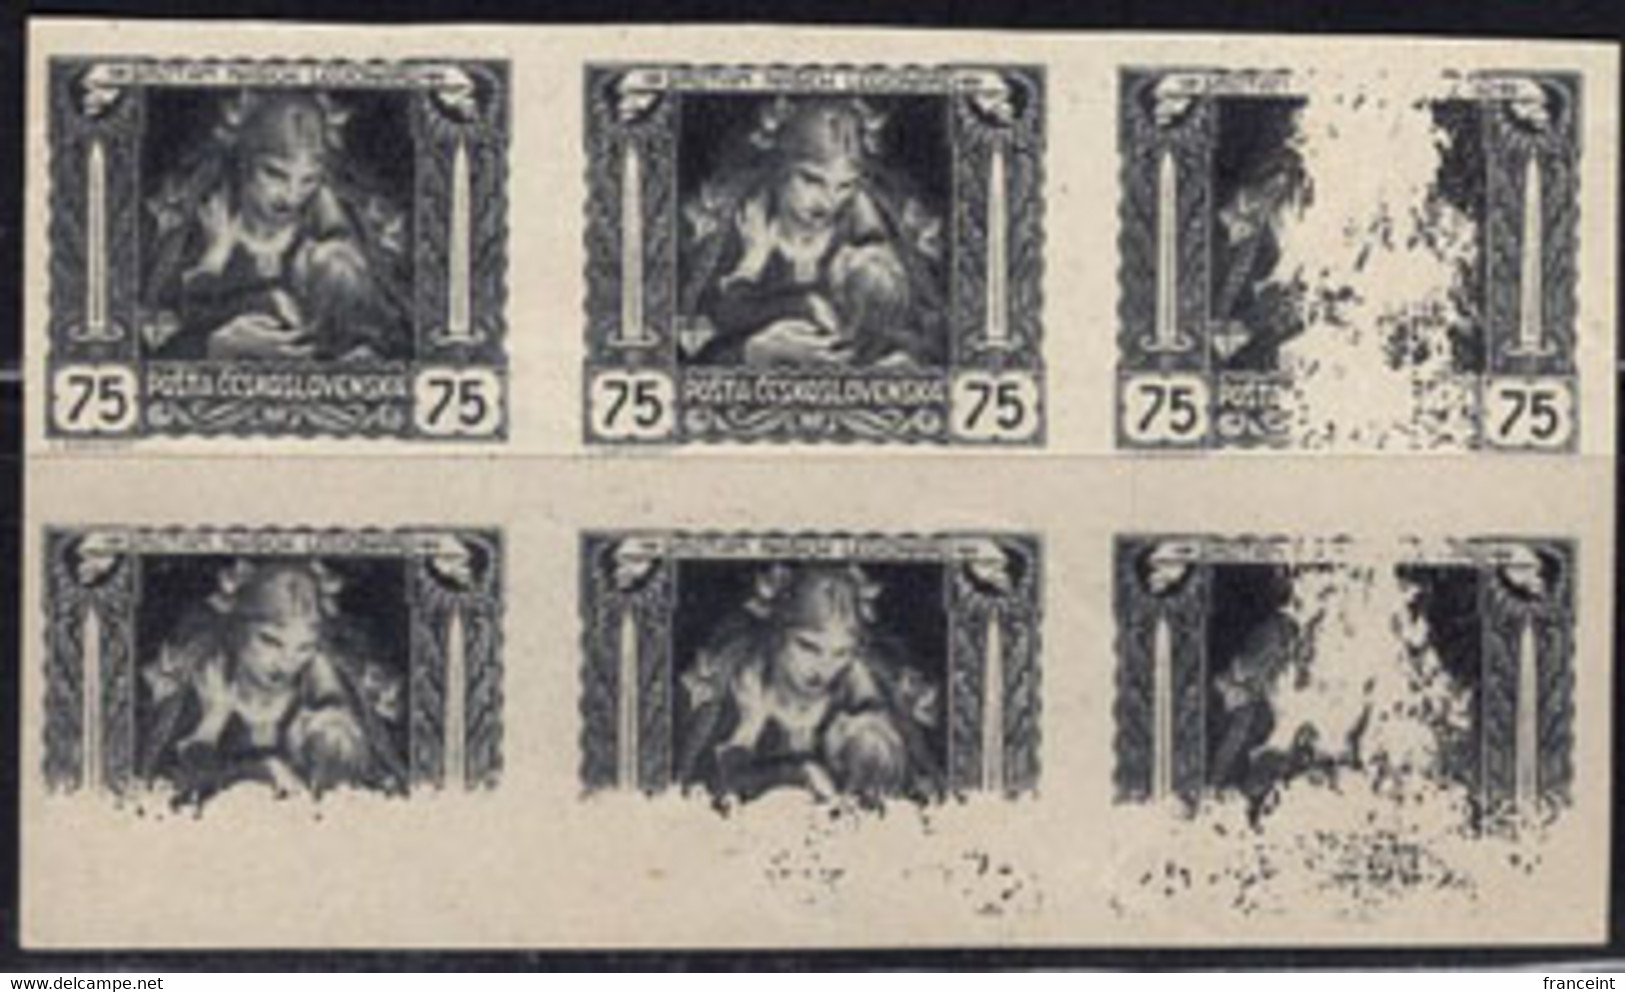 CZECHOSLOVAKIA(1919) Mother And Child. Block Of 6 Imperforate Proofs Printed On White Paper. Scott No B127. - Essais & Réimpressions